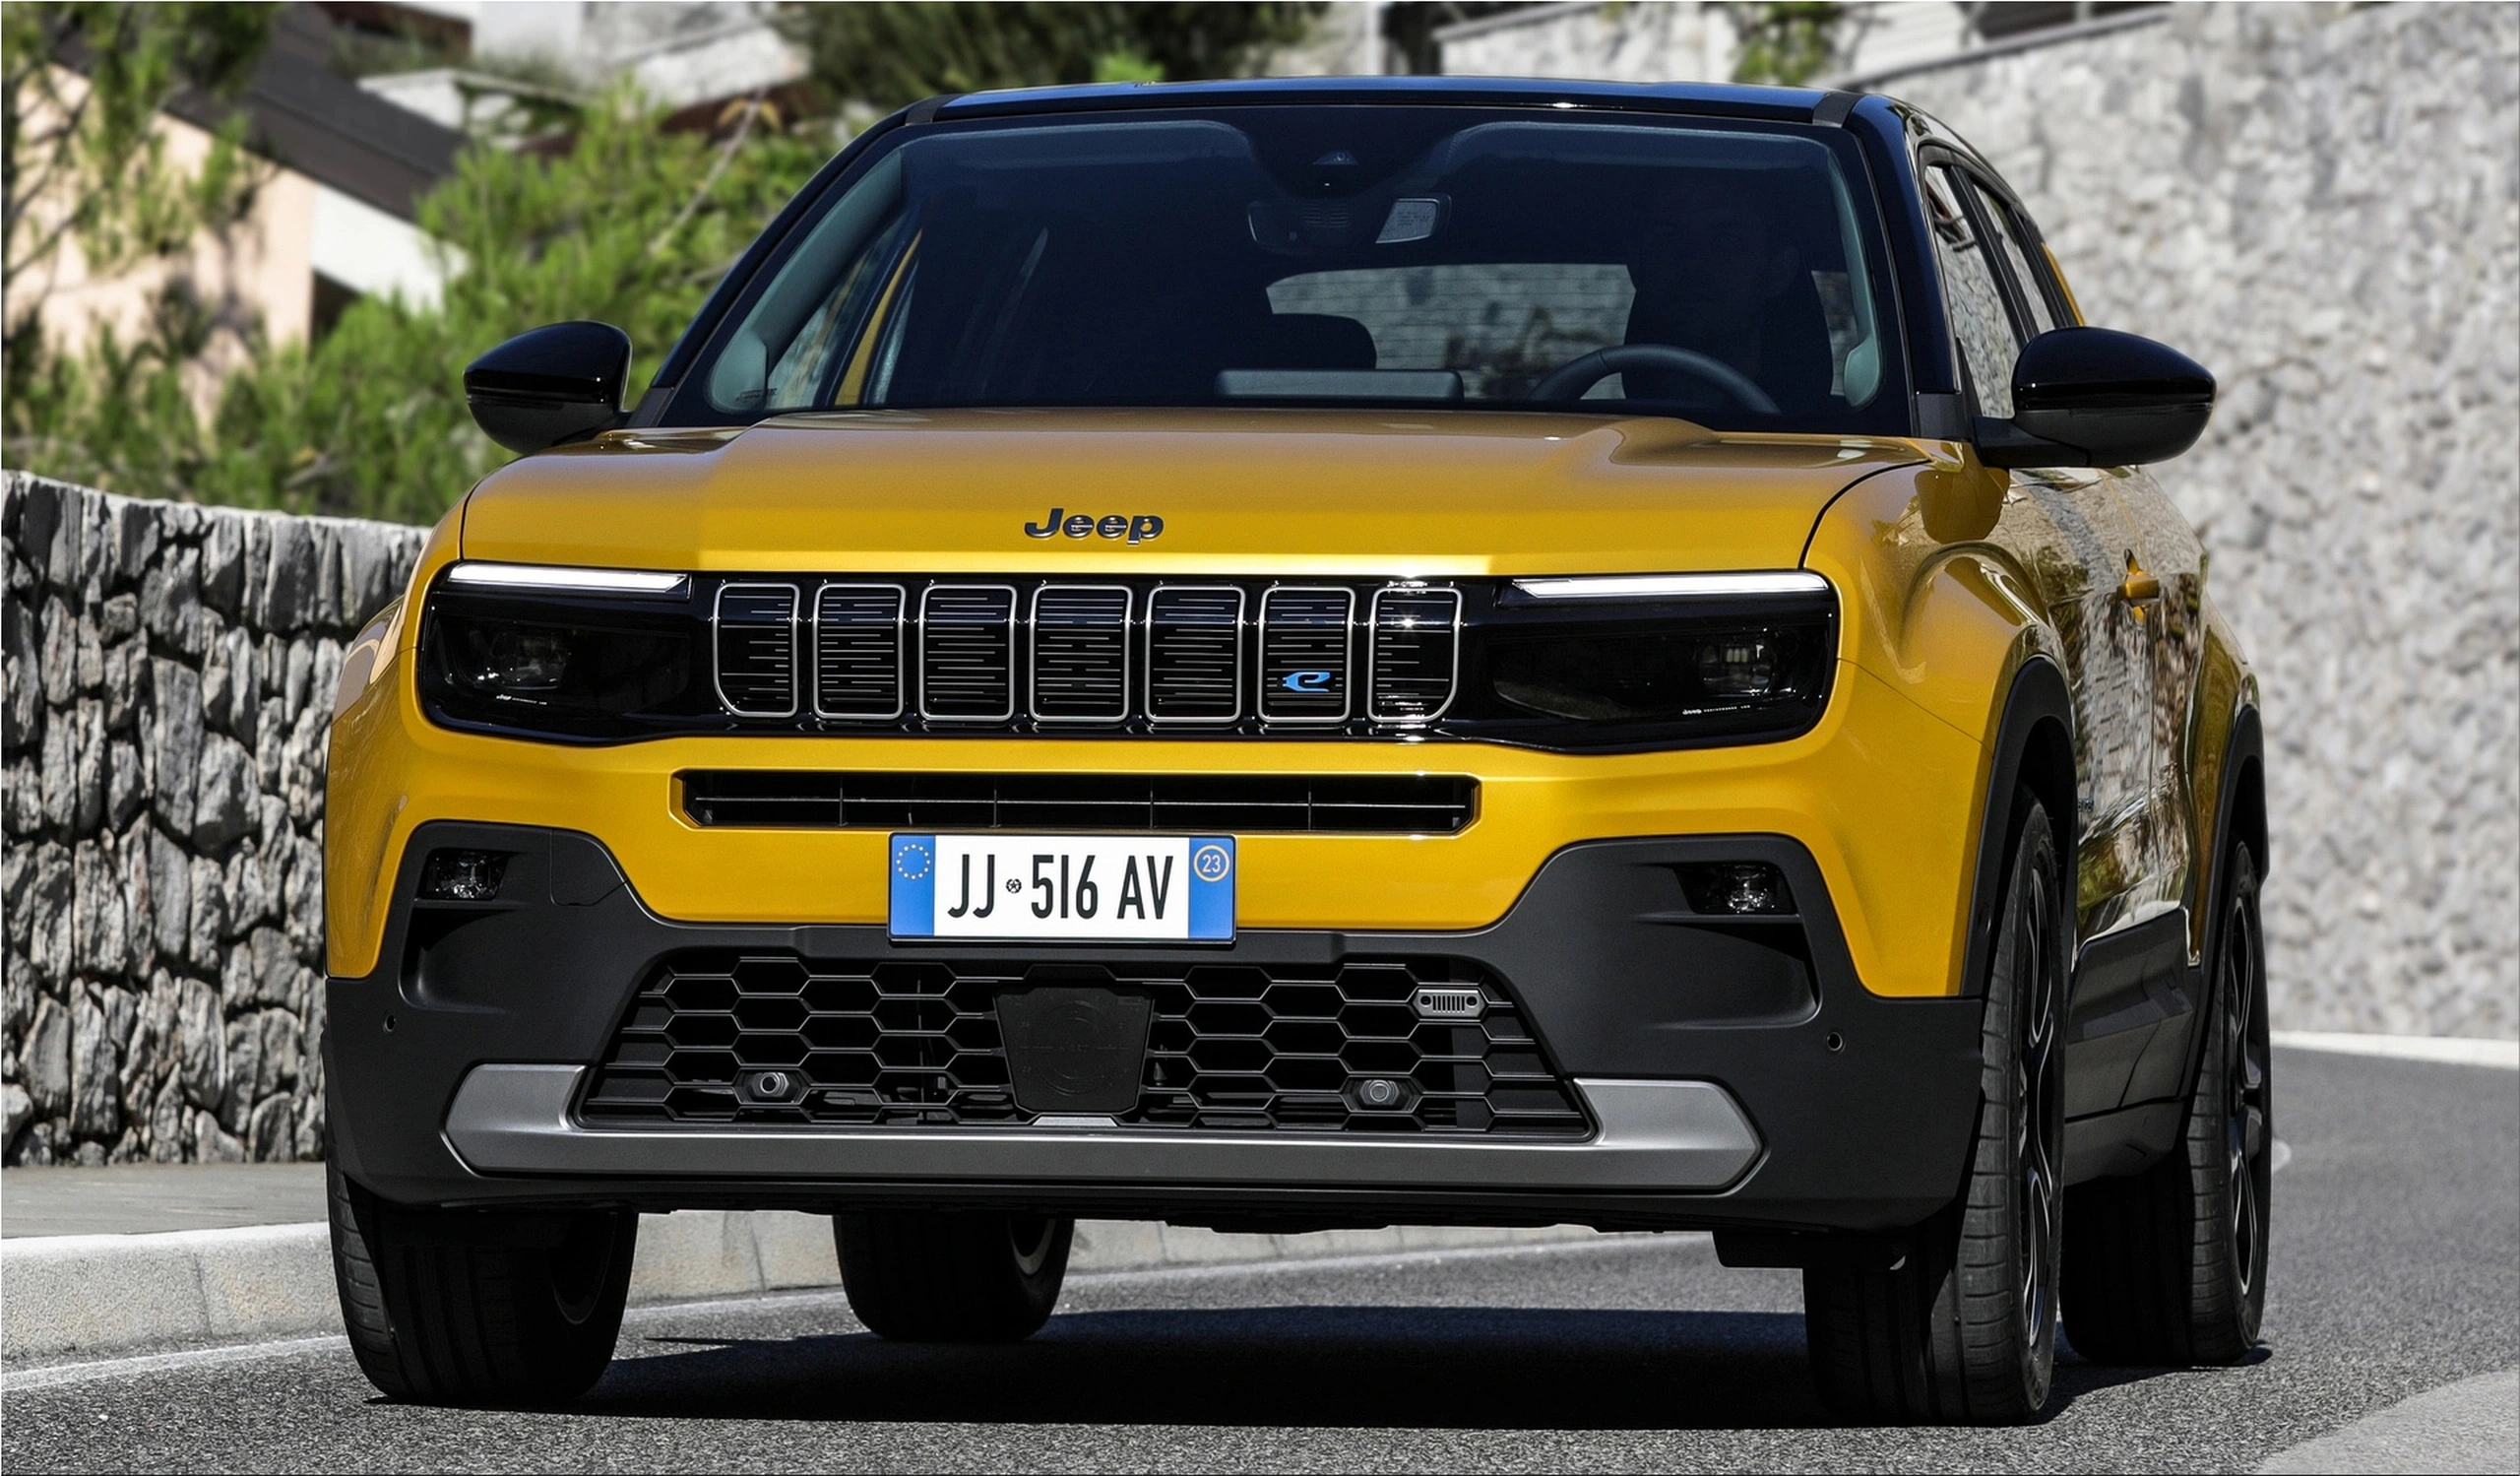 The Jeep Avenger has been selected as the 2023 Car of the Year